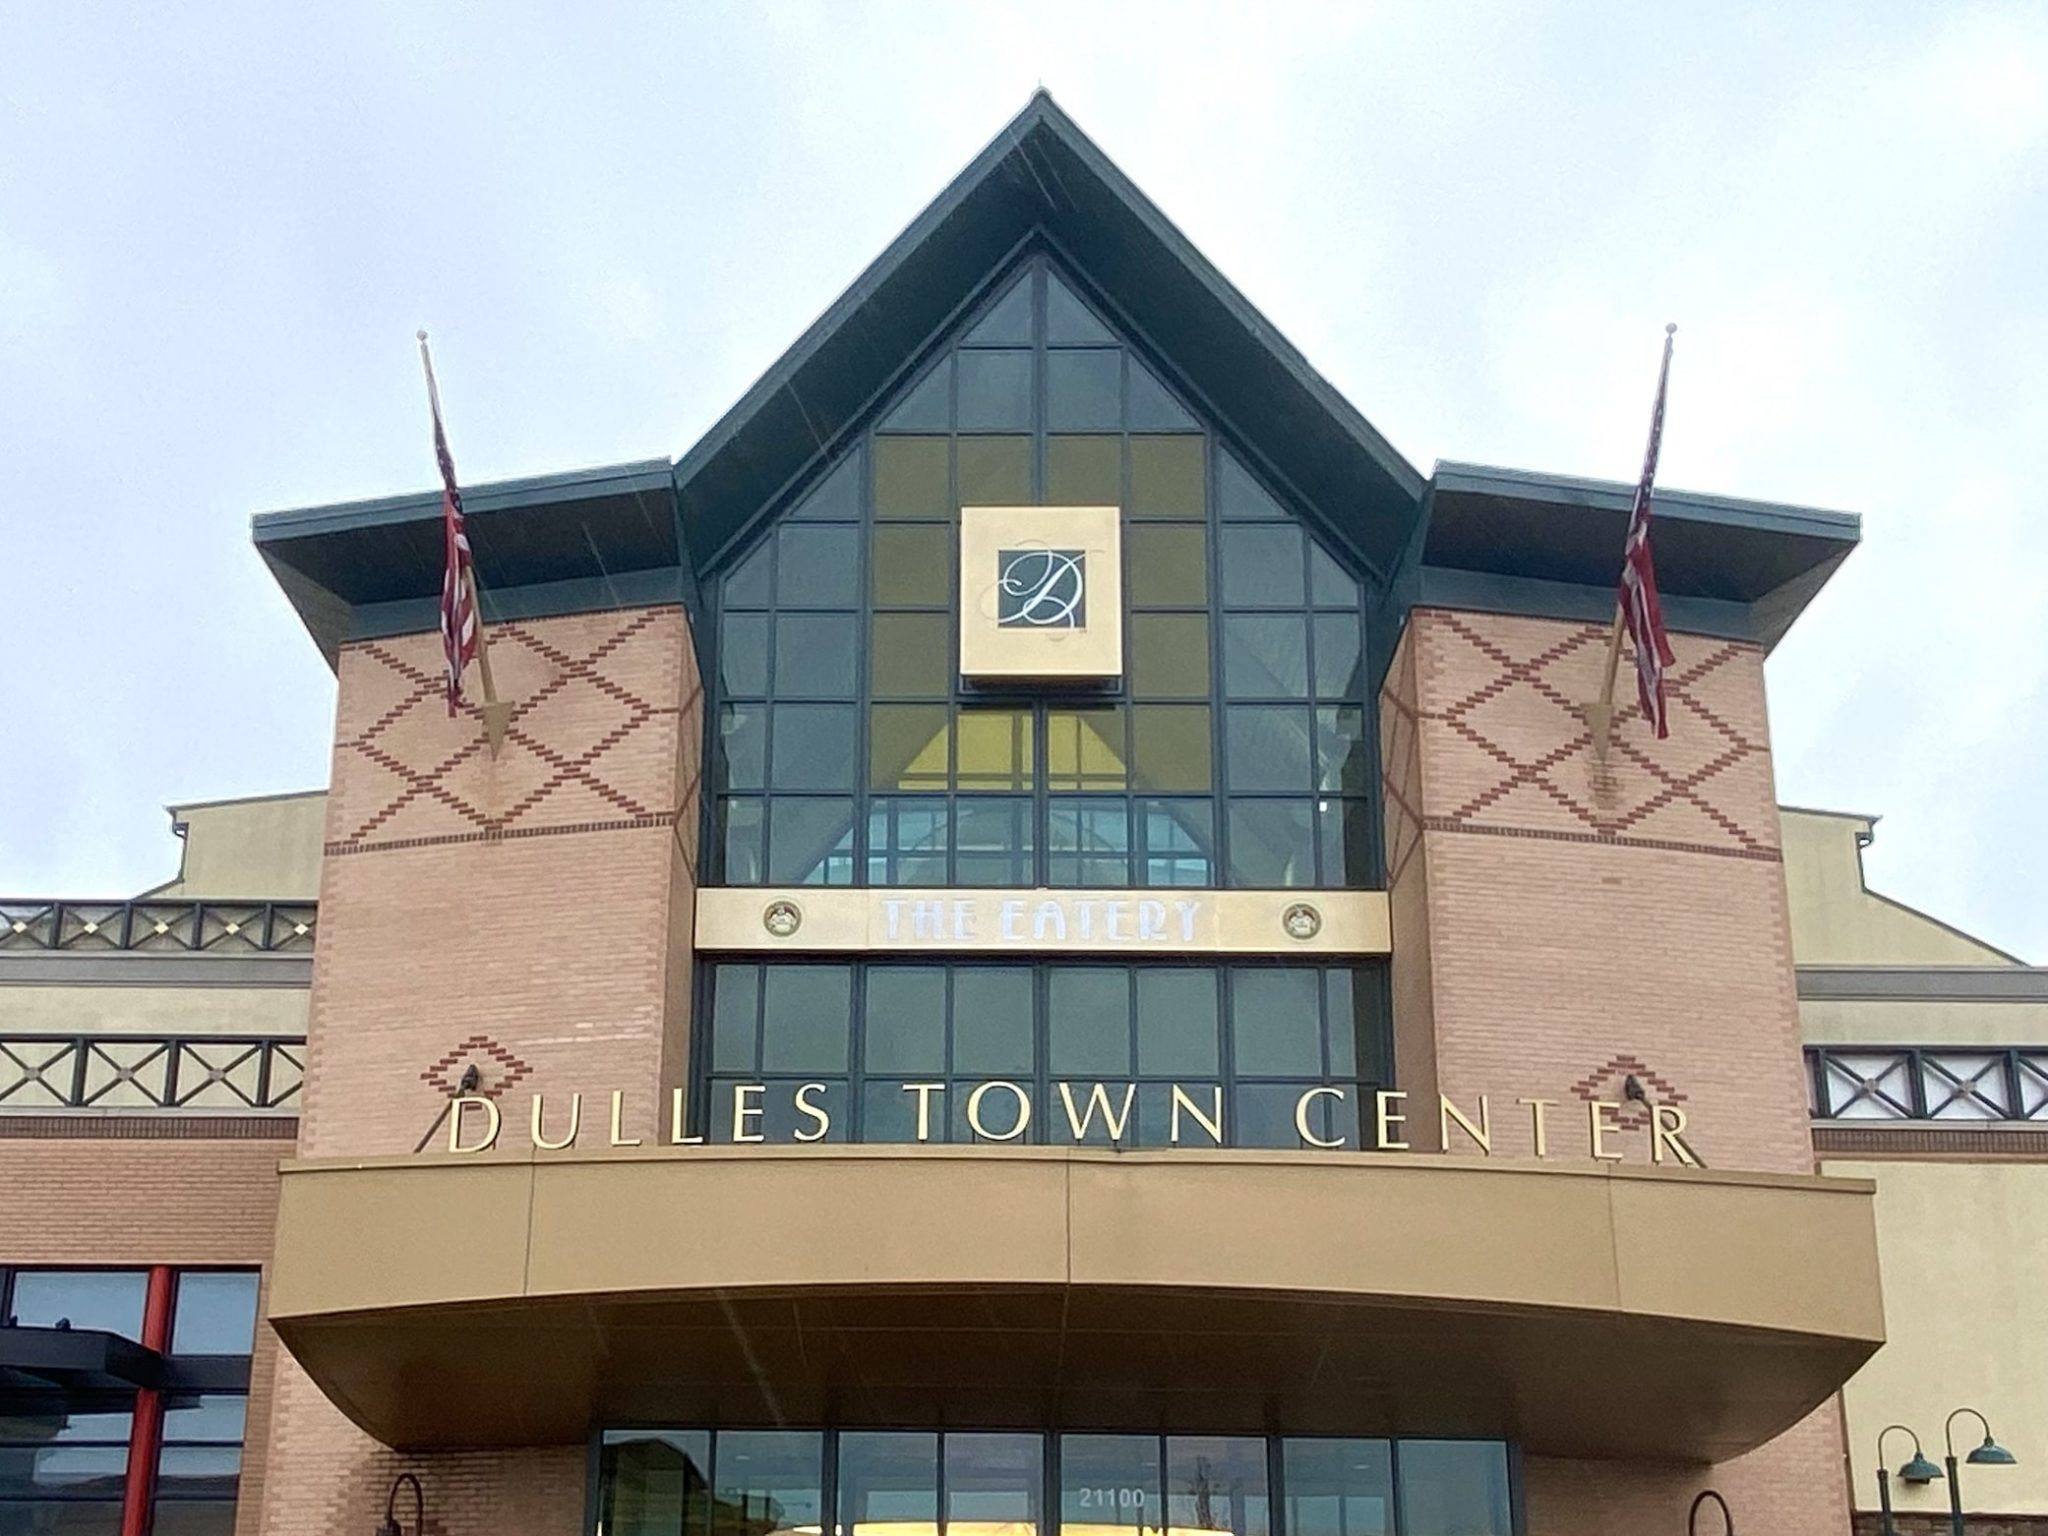 Dulles Town Center with two-story shopping, retail, and entertainment